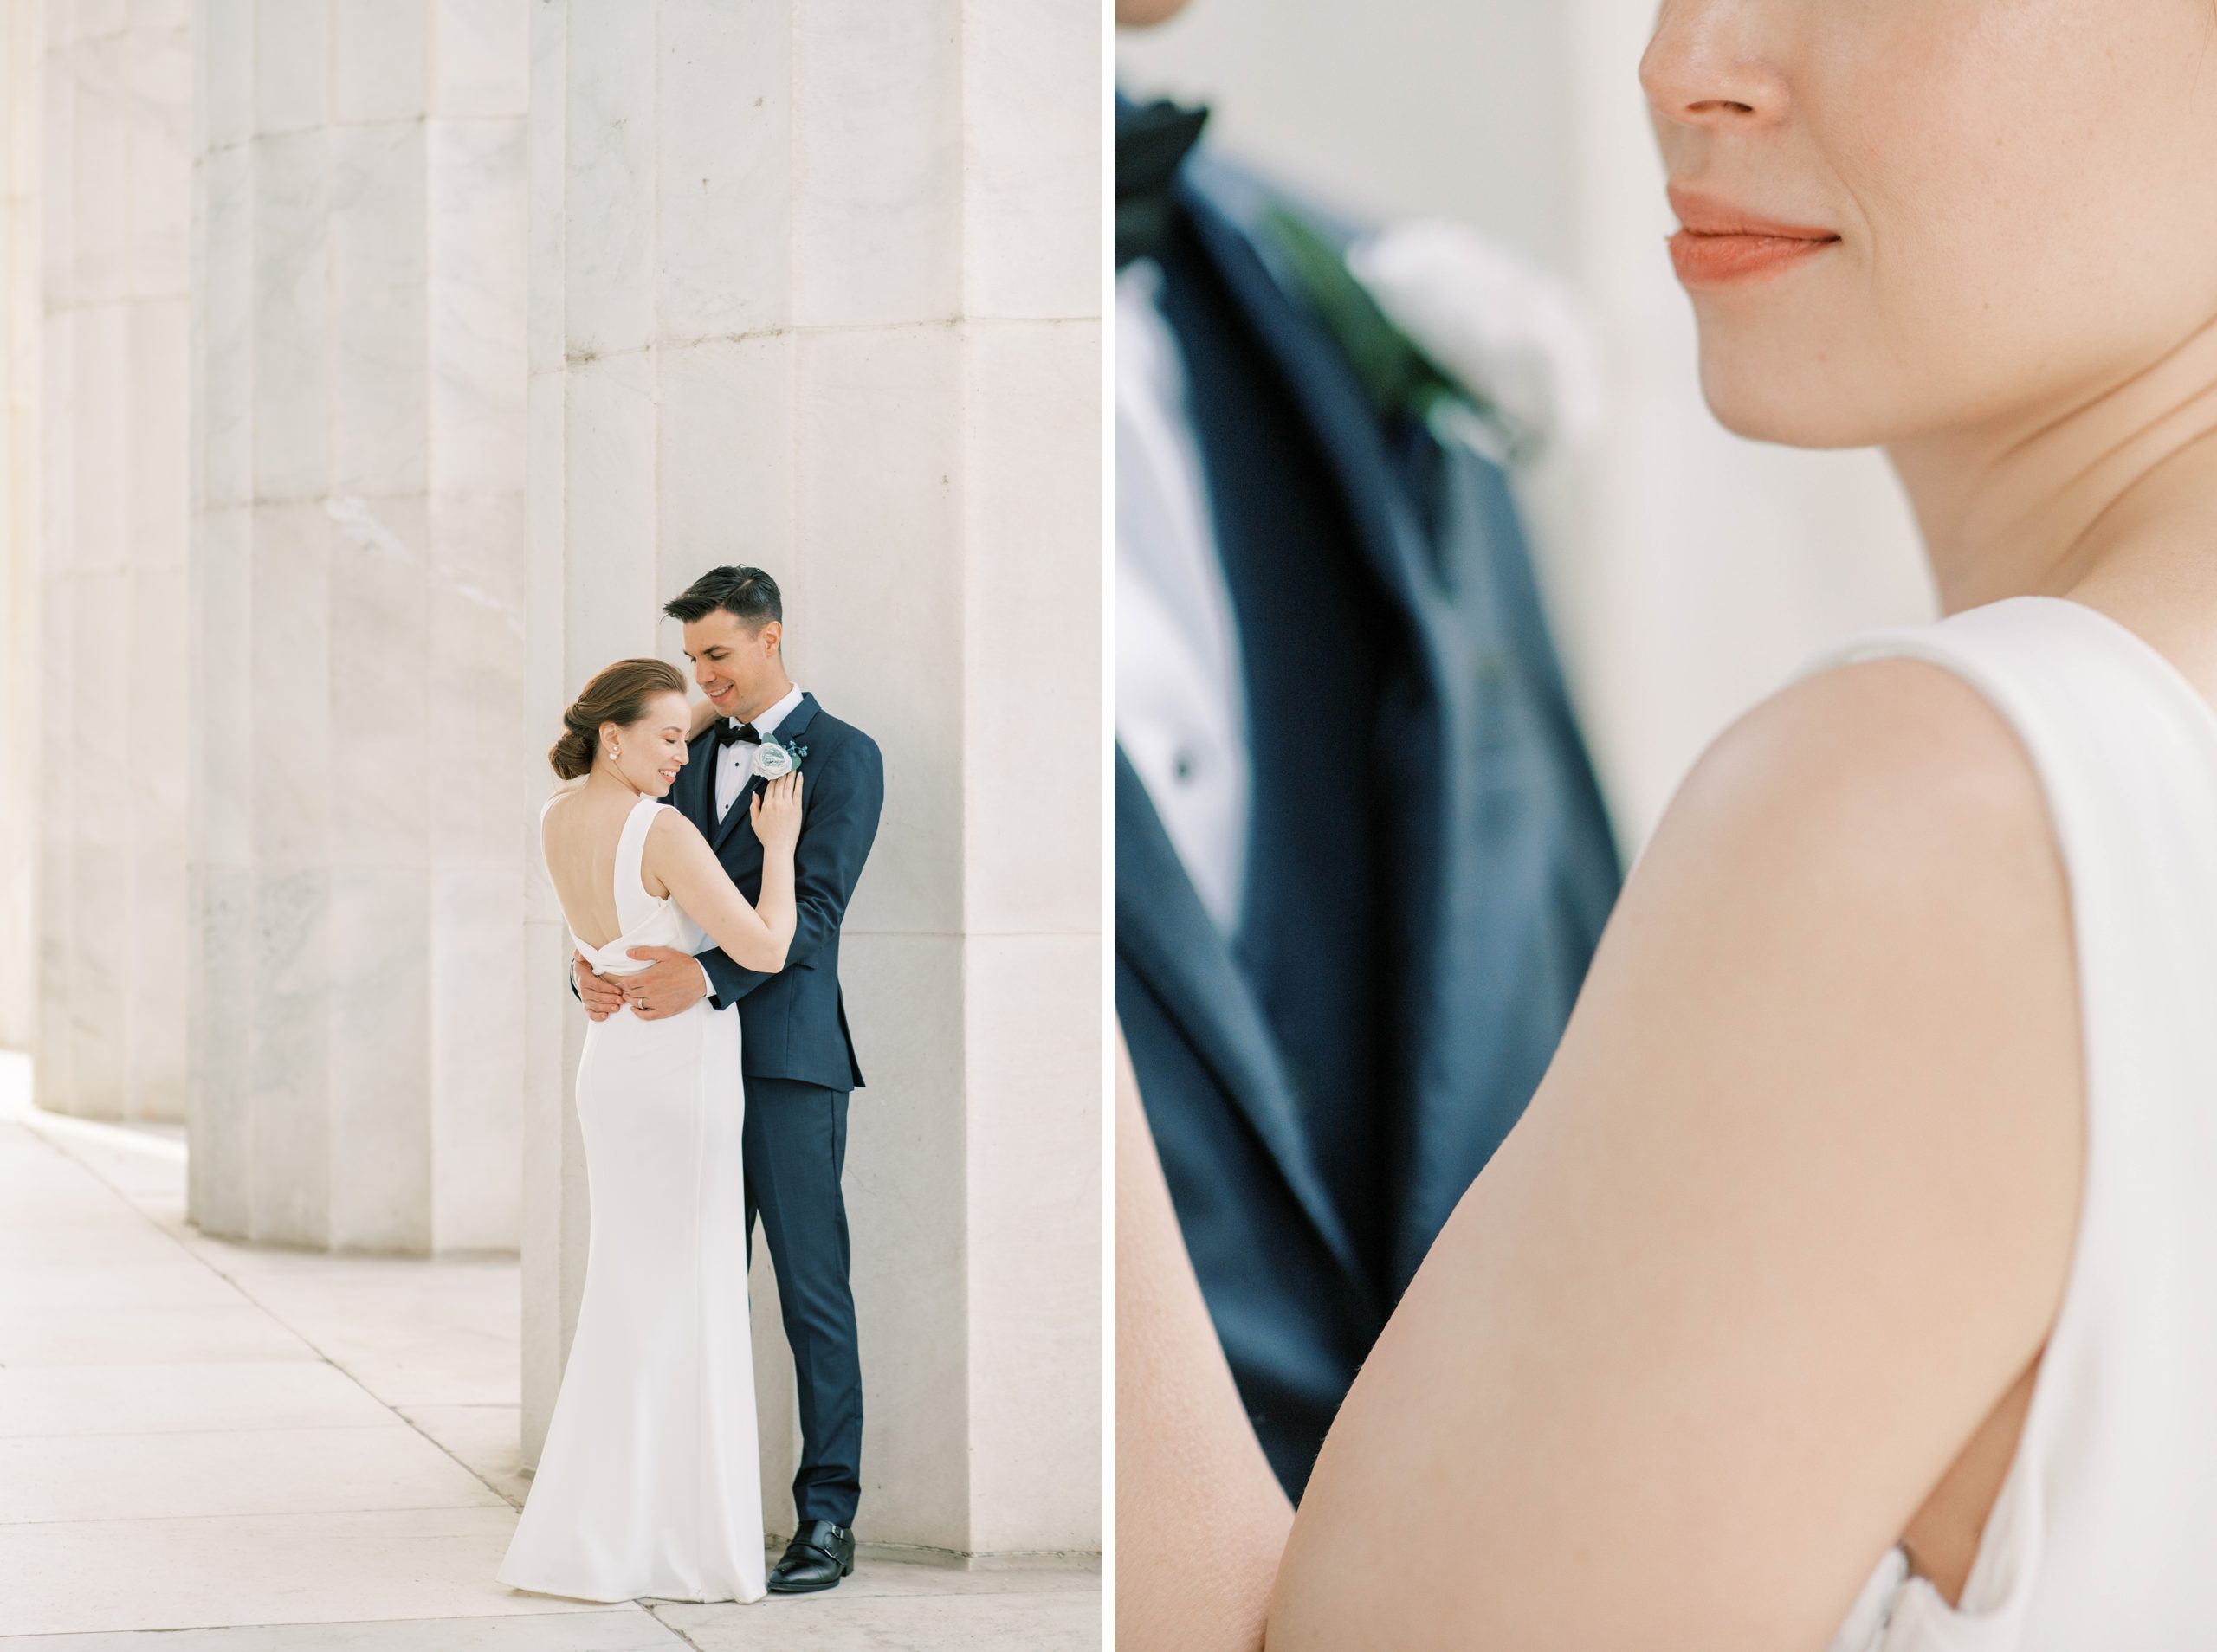 A private elopement held at the DC War Memorial in Washington, DC with photographs by Alicia Lacey Photography.